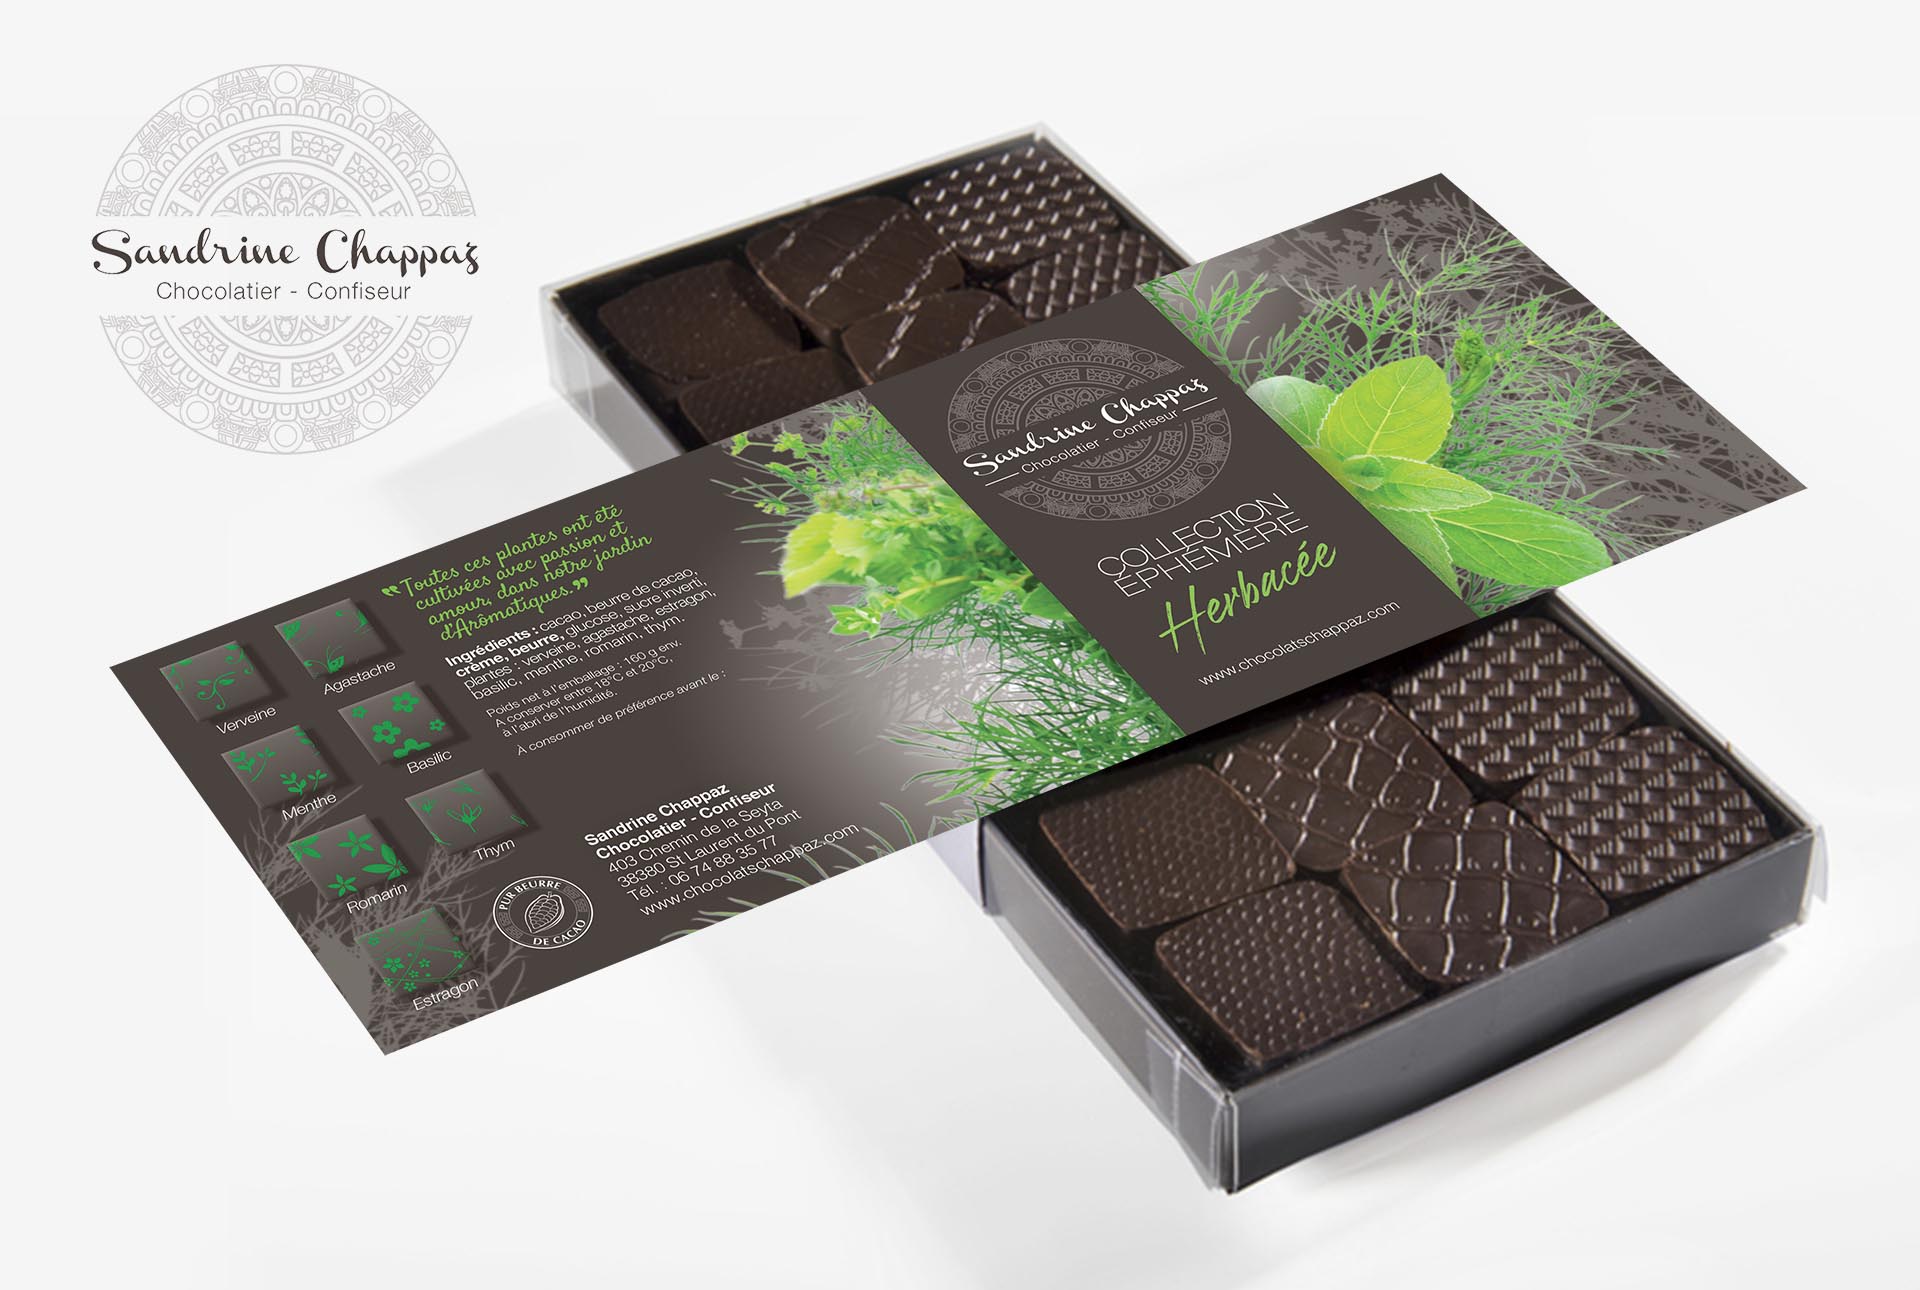 Chappaz creation packaging alimentaire graphiste grenoble